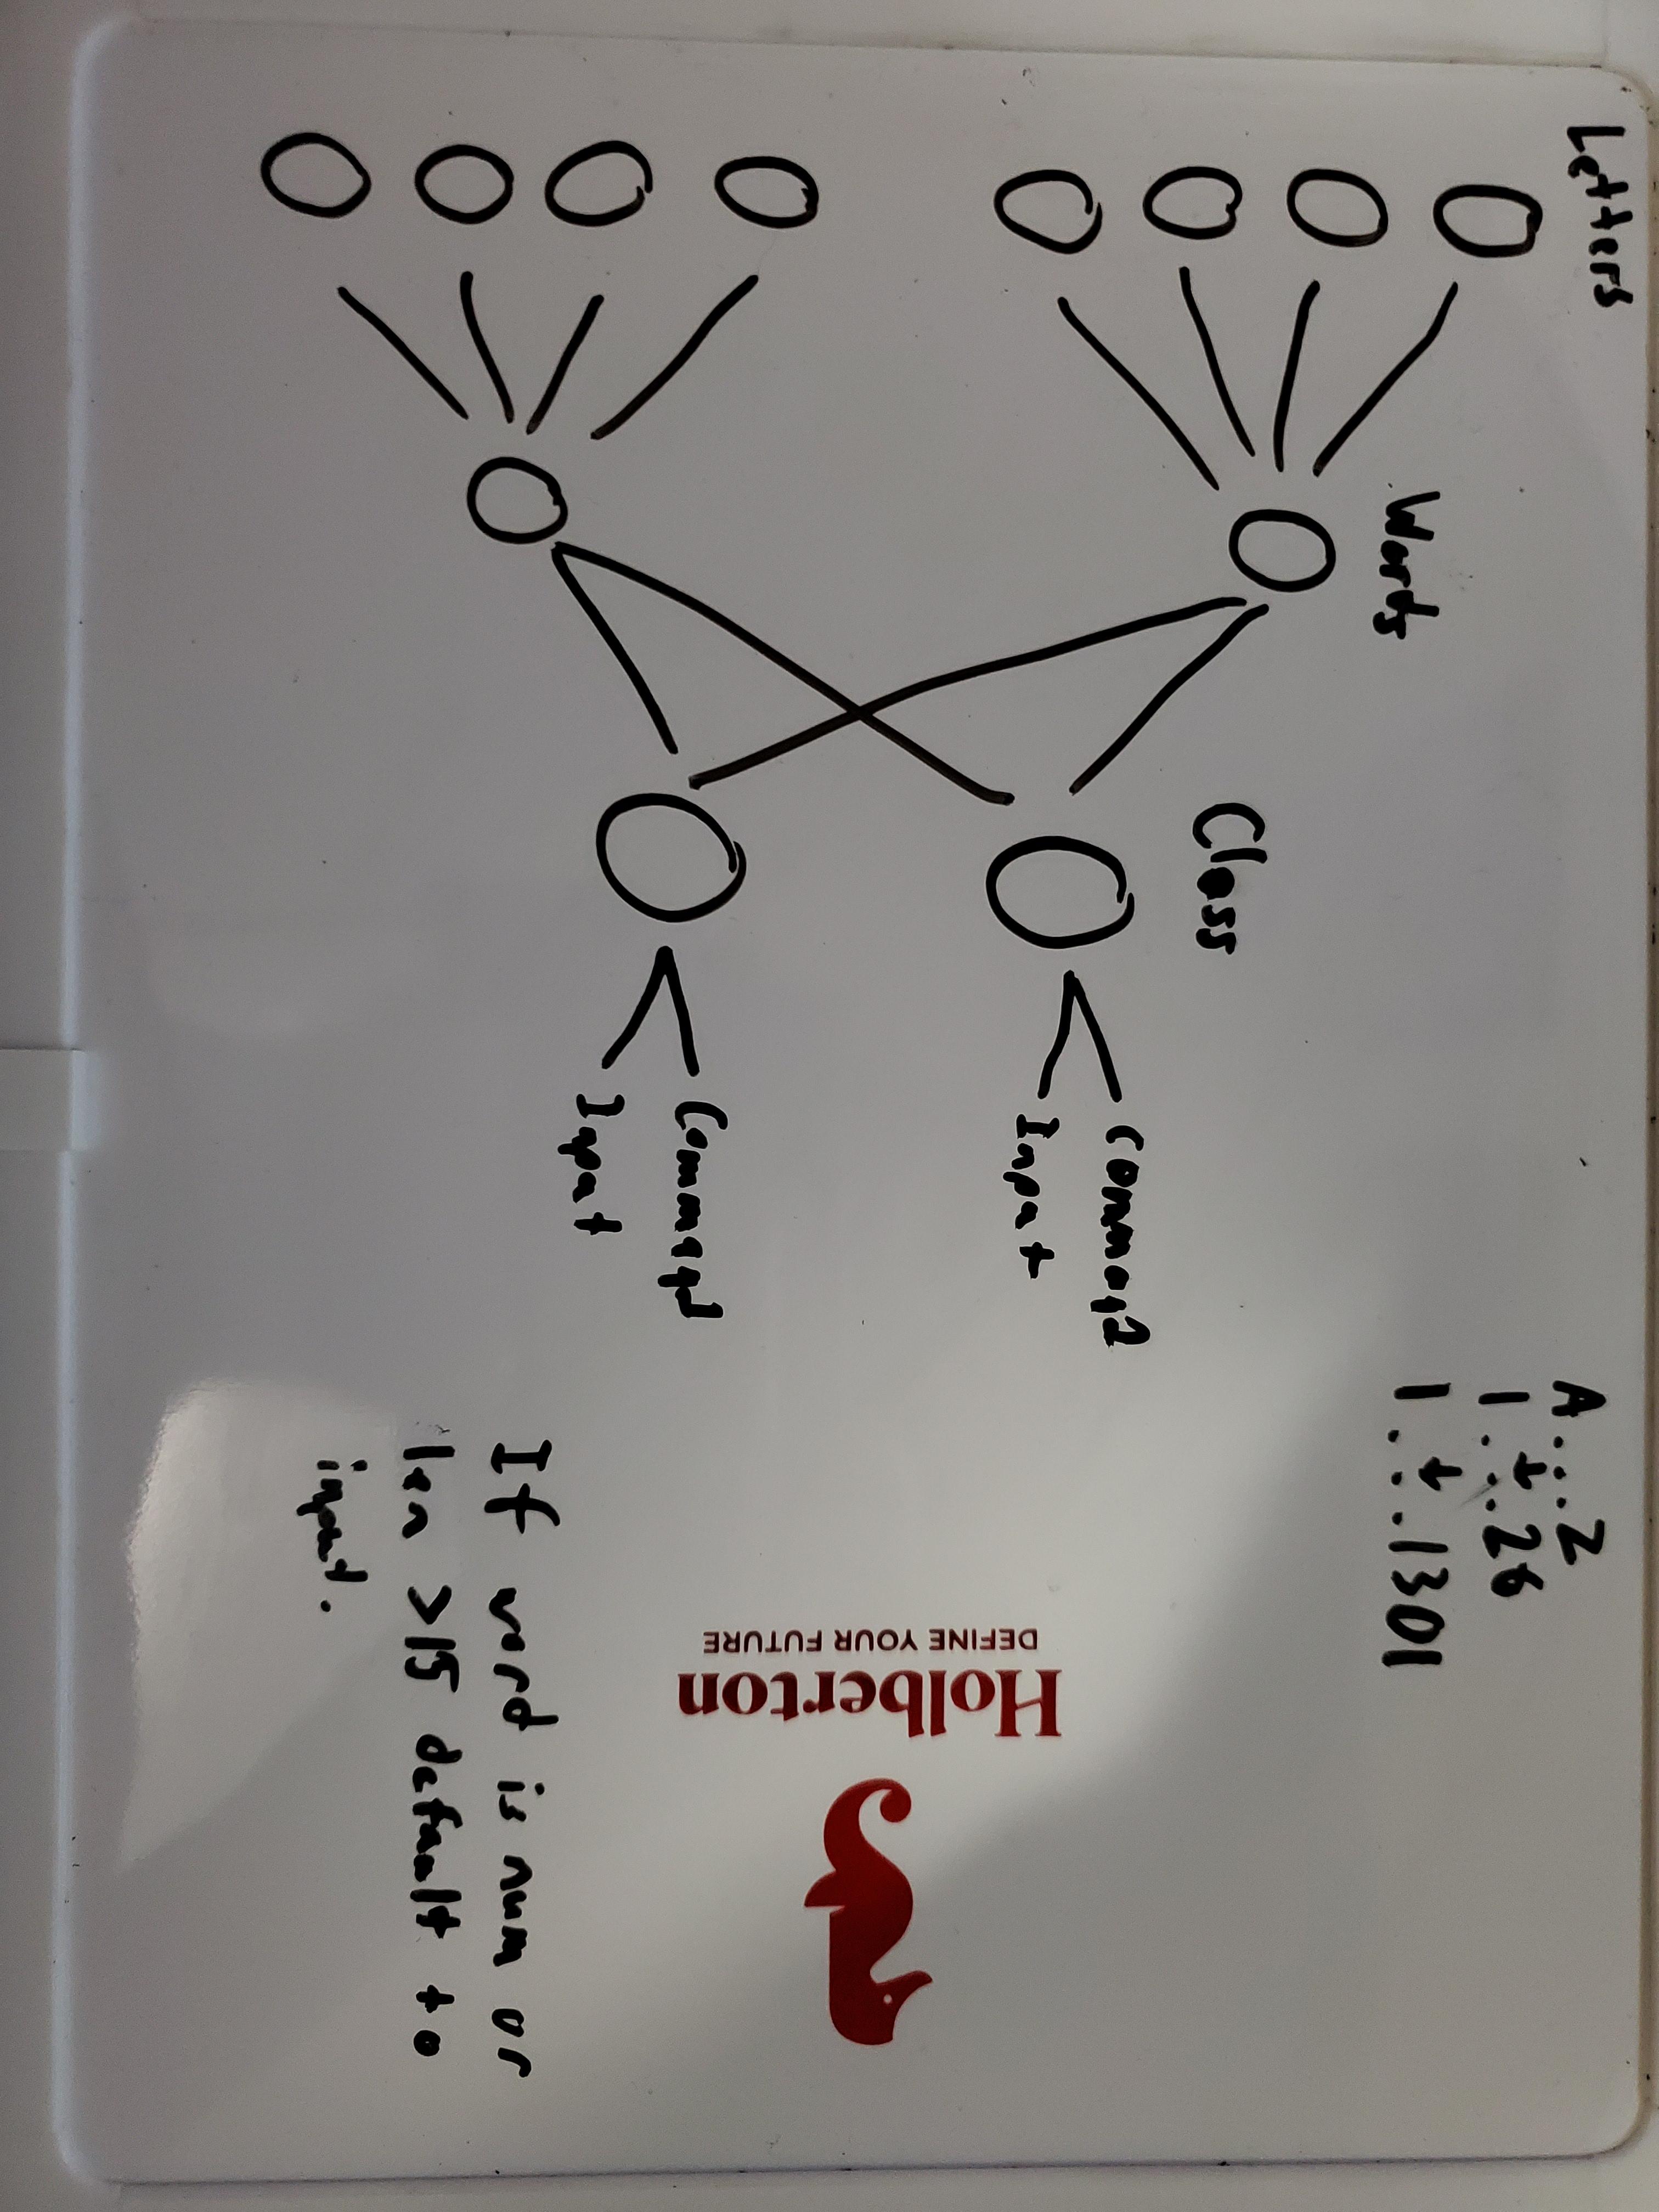 Photo of the original plan for the neural net.